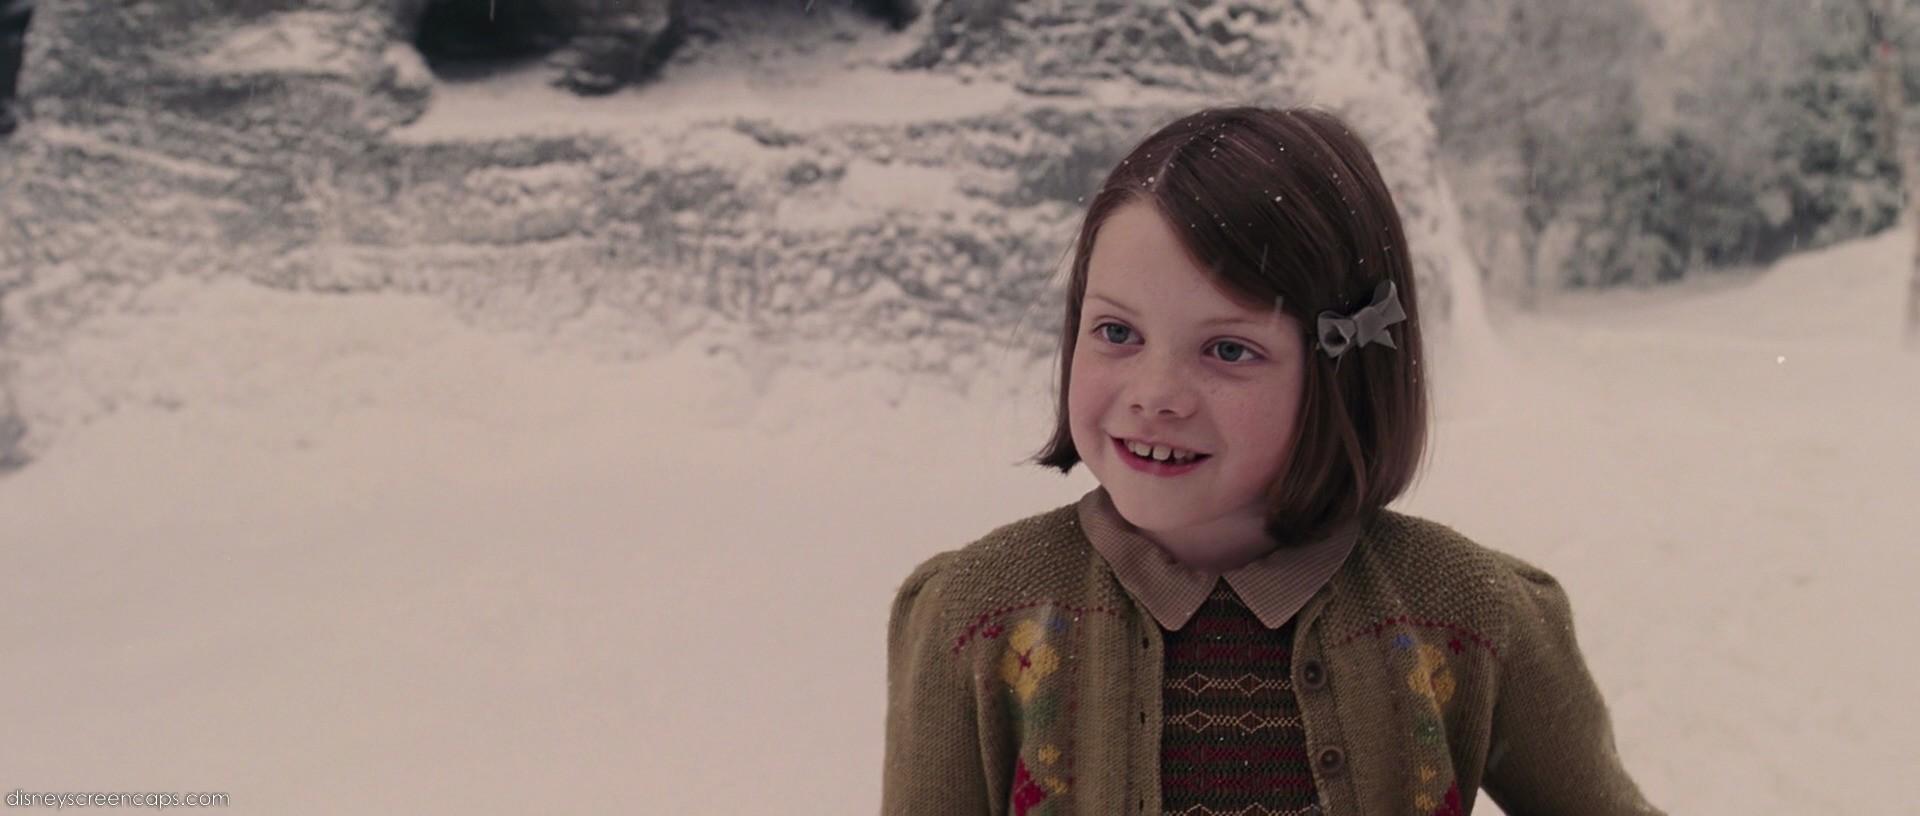 The Chronicles Of Narnia image 15 Picture of Lucy Pevensie and Mr